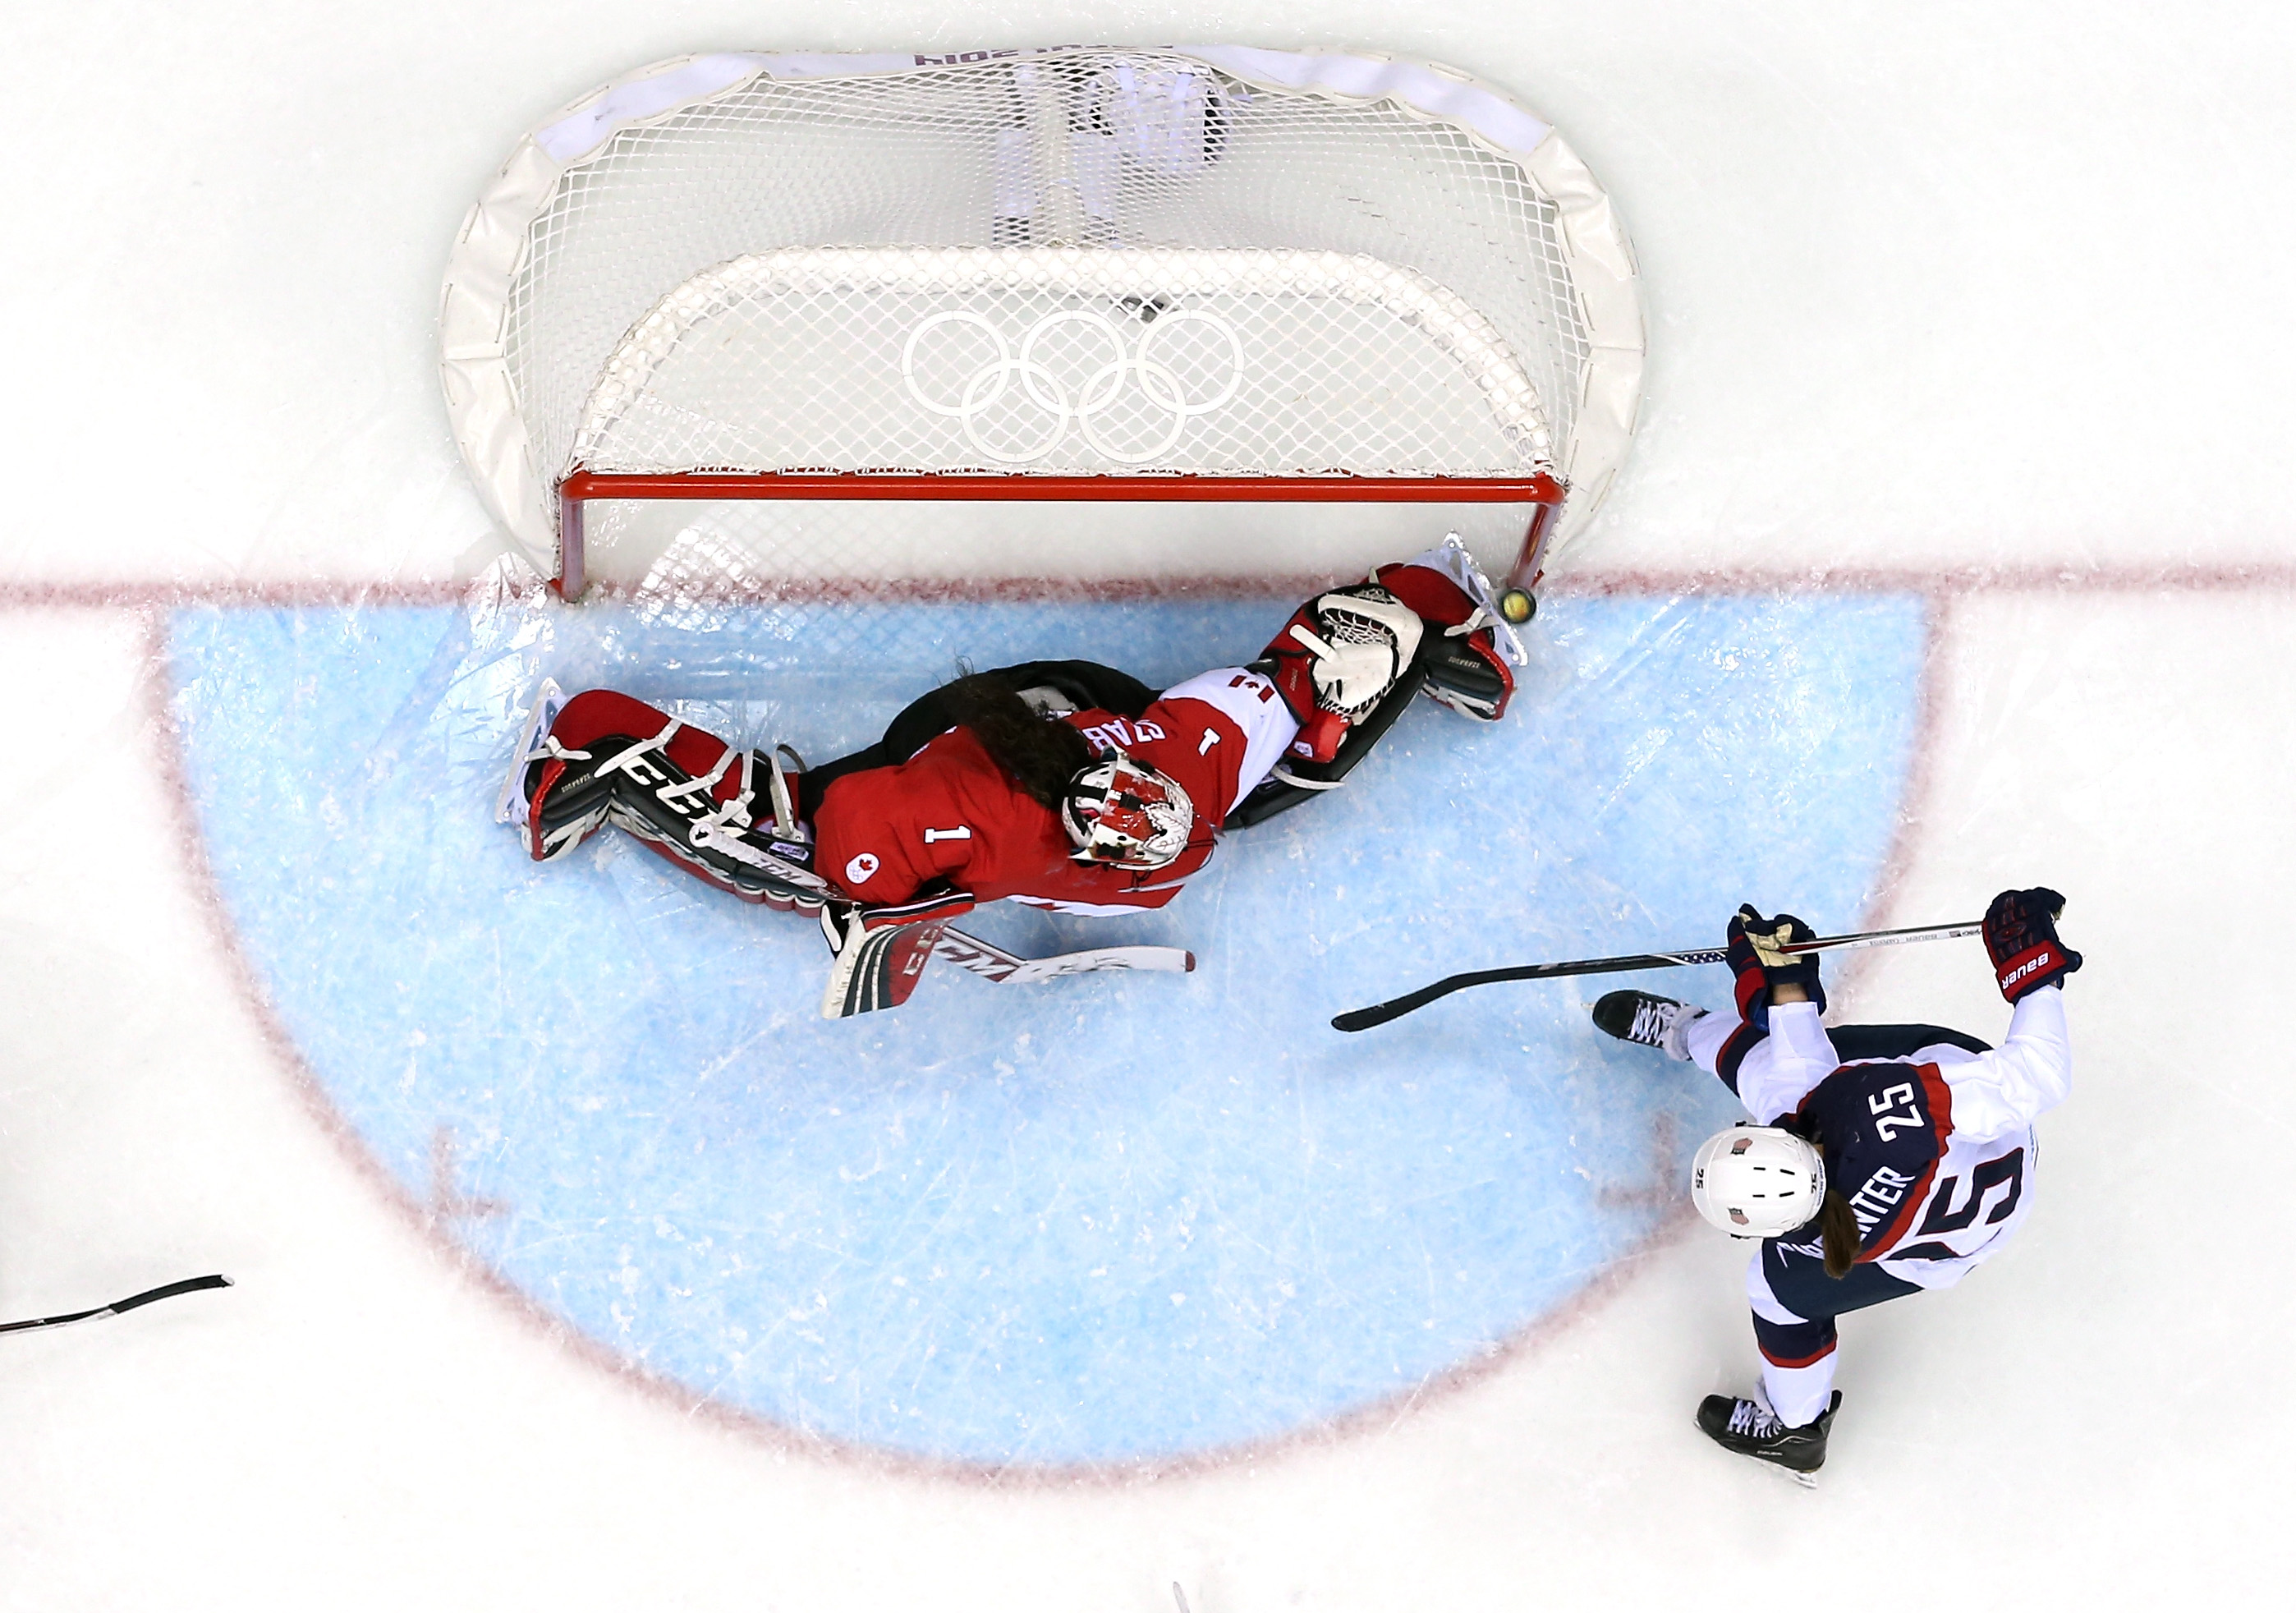 Alex Carpenter #25 of United States shoots and scores against Shannon Szabados #1 of Canada in the third period during the Ice Hockey Women's Gold Medal Game on day 13 of the Sochi 2014 Winter Olympics at Bolshoy Ice Dome on February 20, 2014 in Sochi, Russia. (Martin Rose—Getty Images)